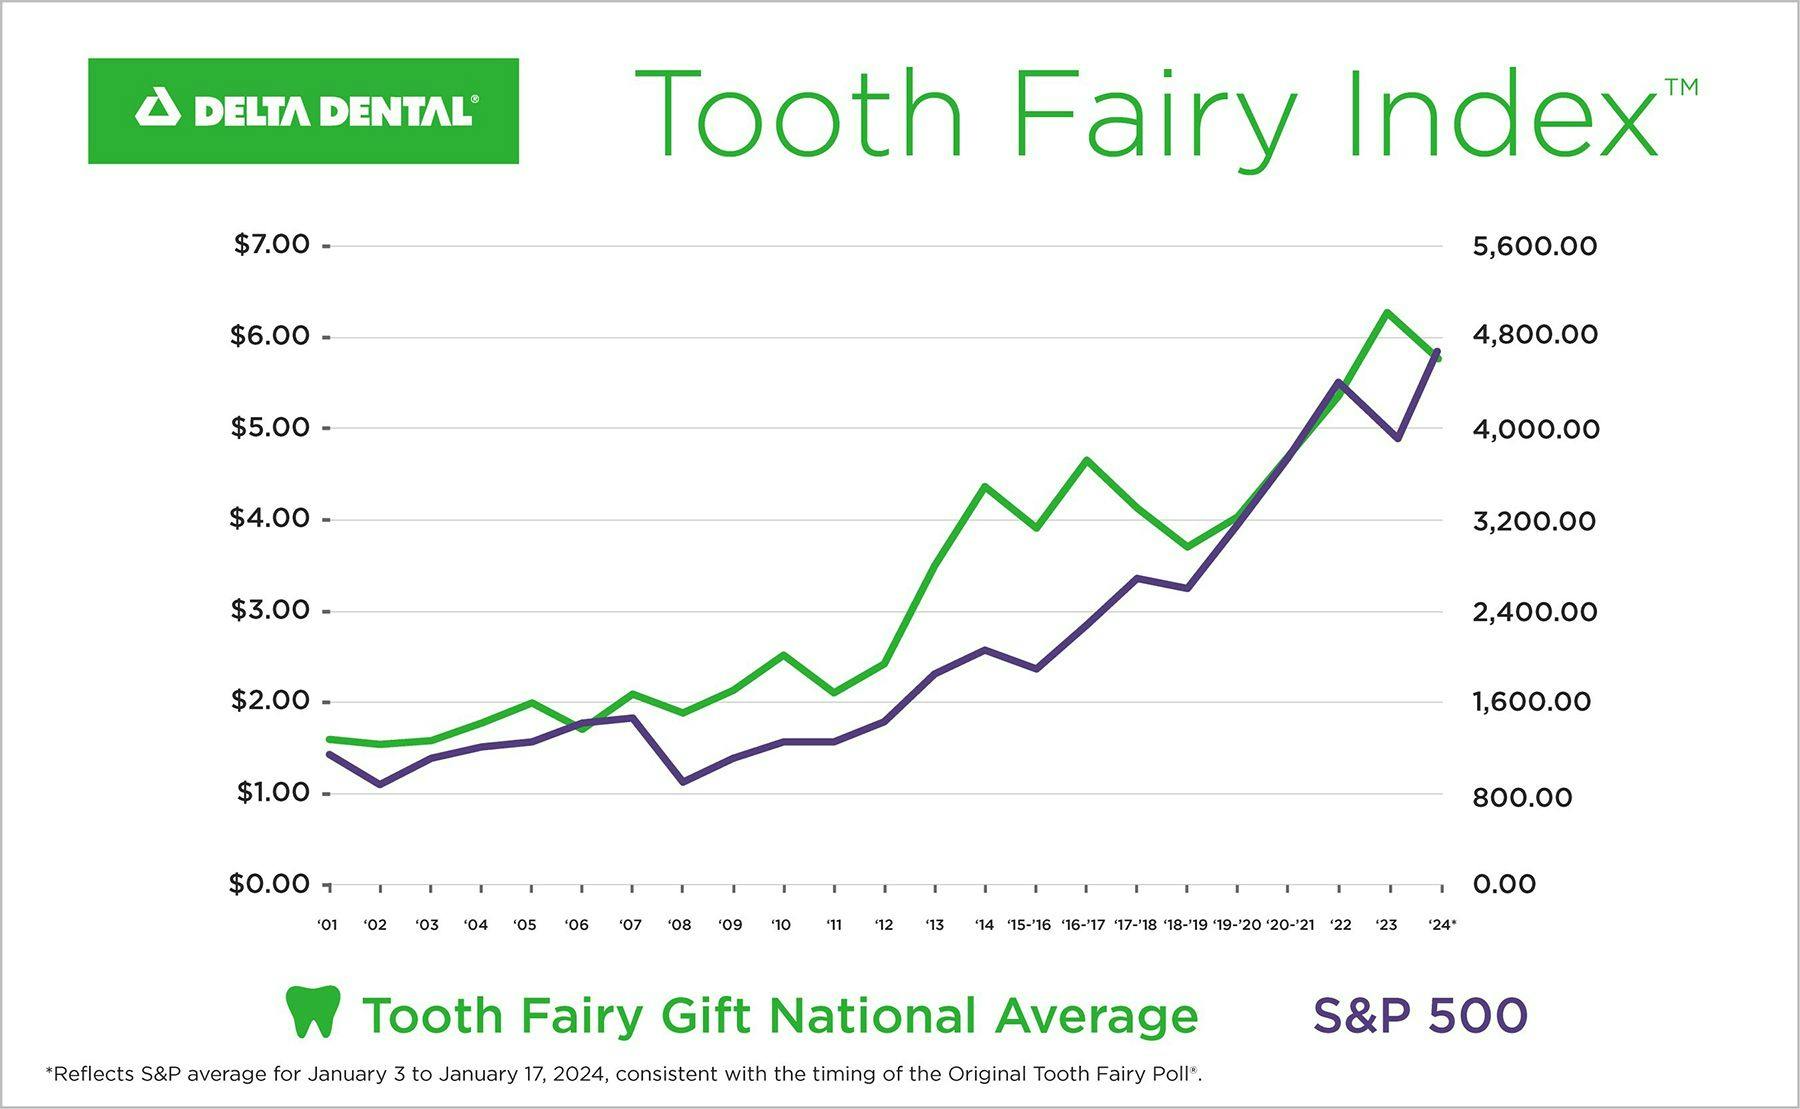 Delta Dental Says Tooth Fairy’s Generosity Takes a Hit | Image Credit: © Delta Dental 